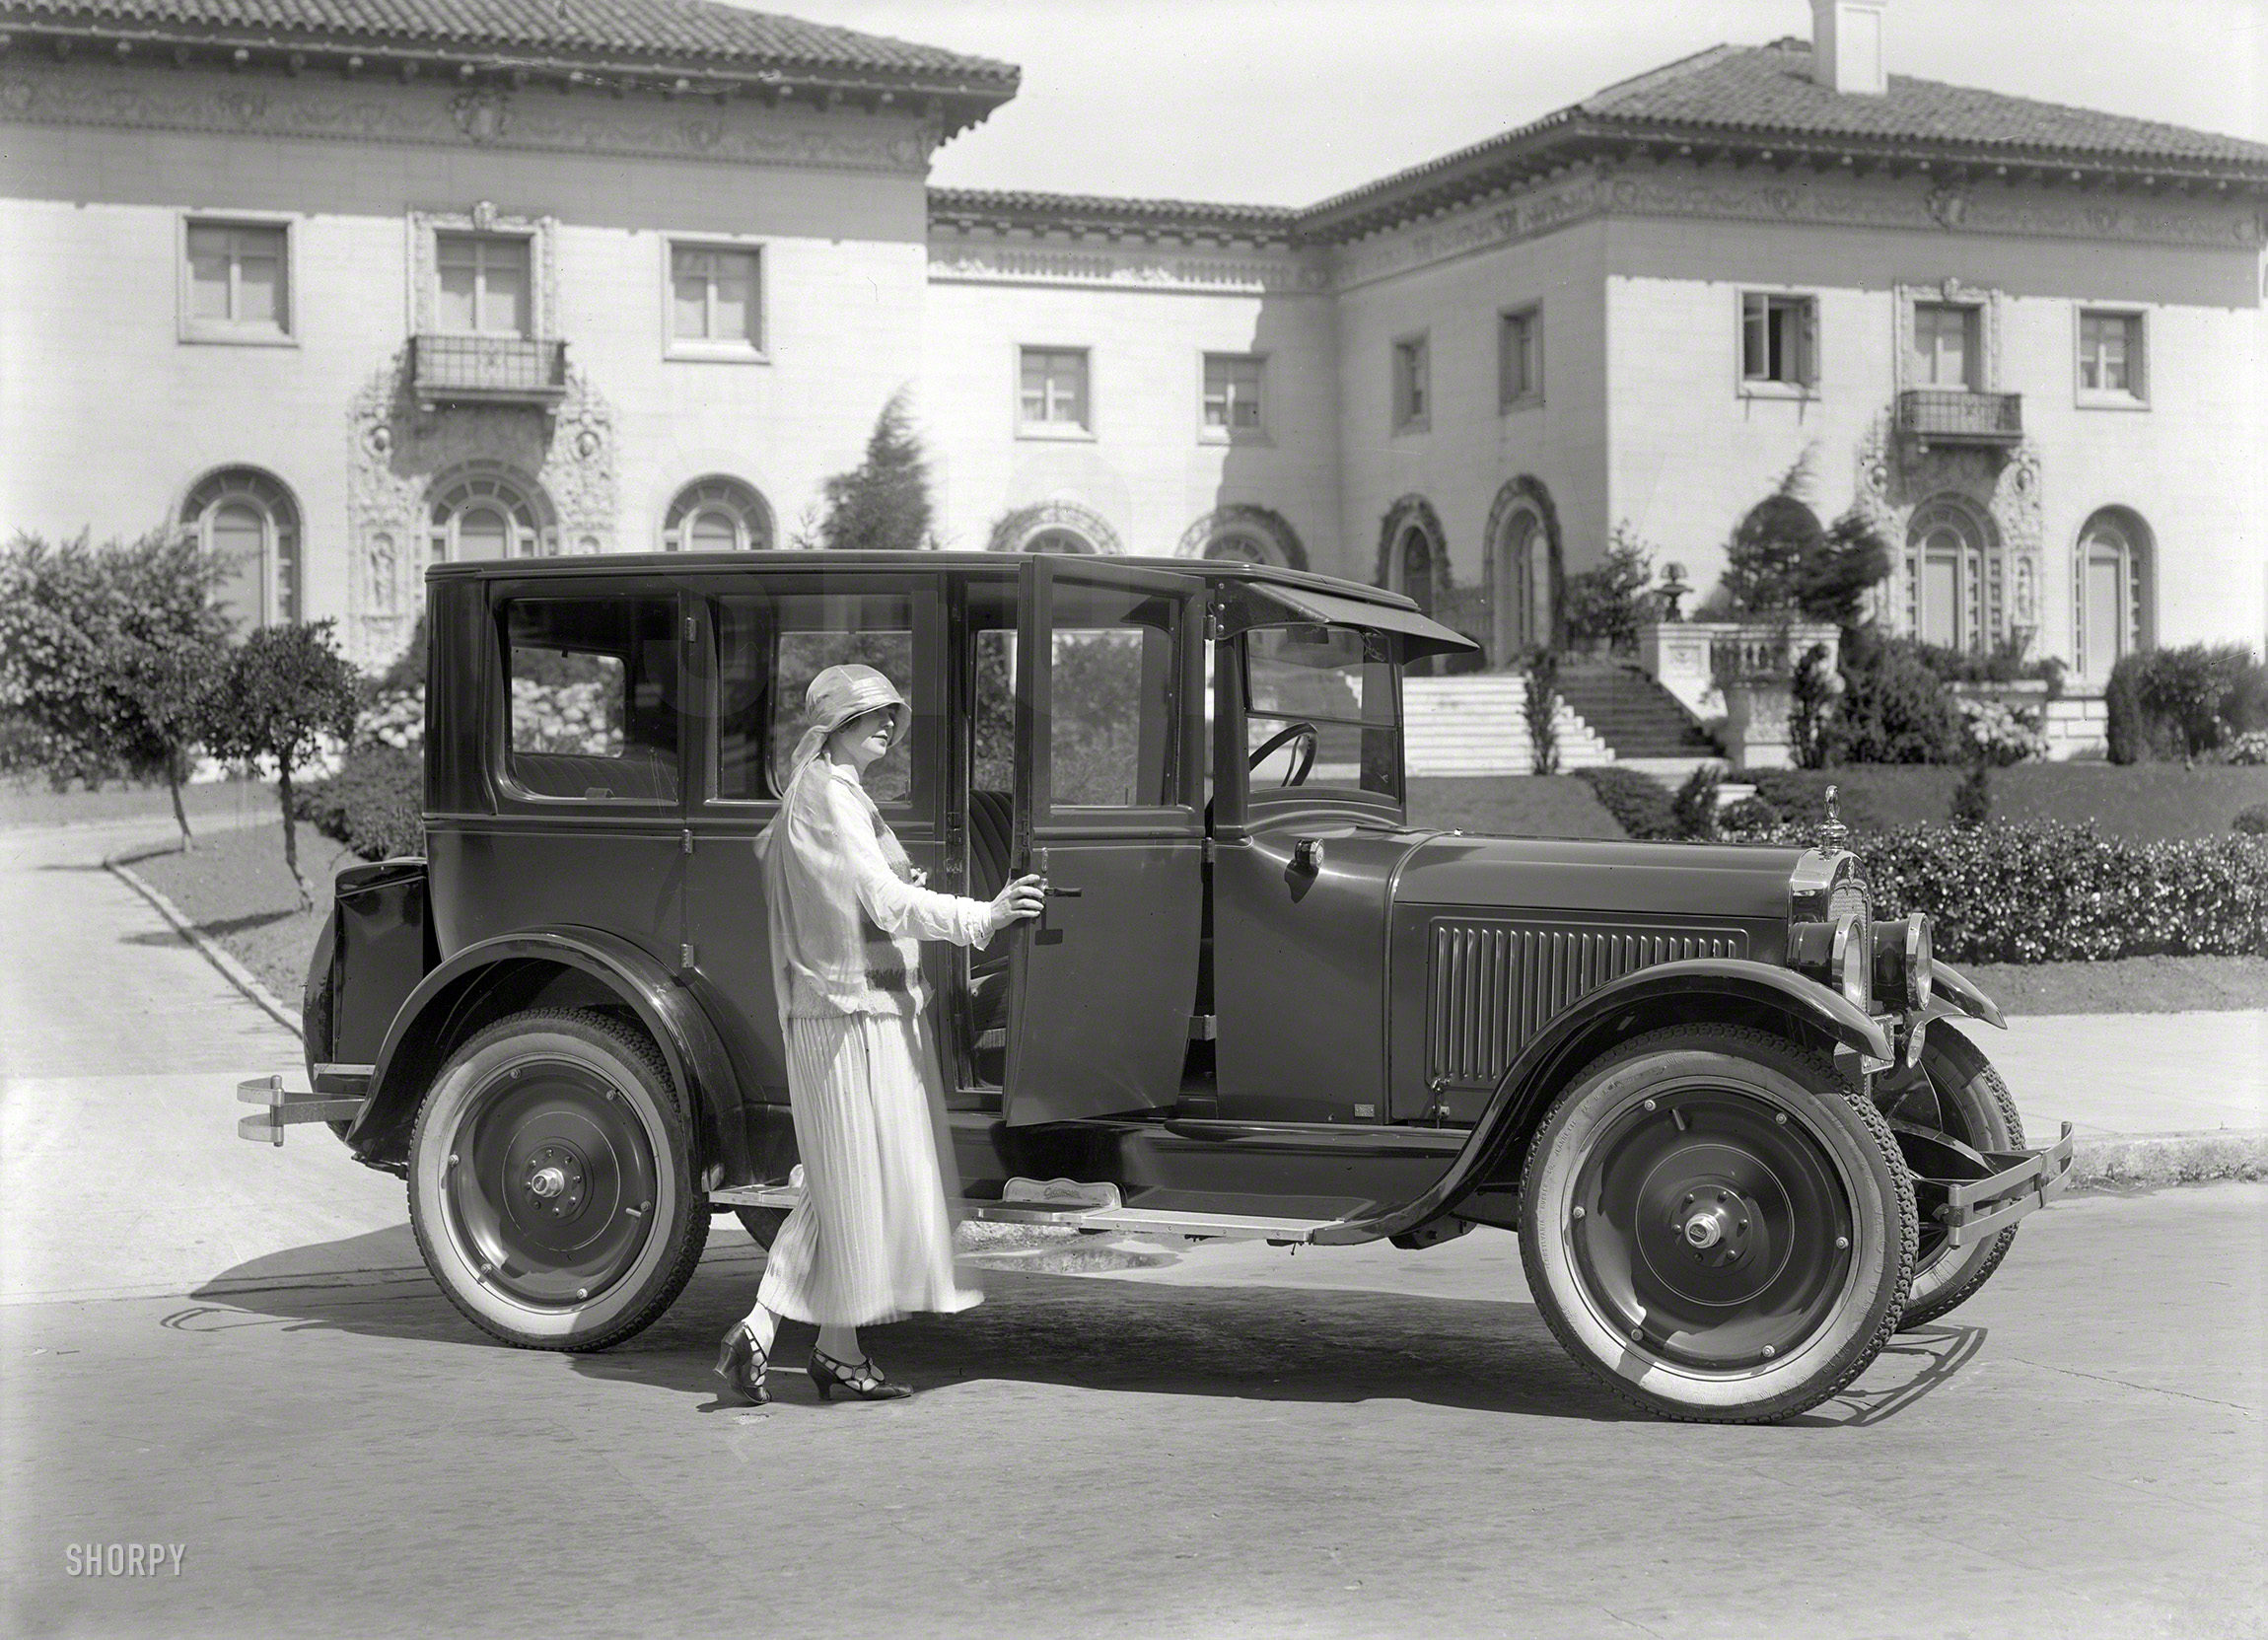 San Francisco circa 1924. "Oldsmobile sedan." Ready to waft Milady to her club luncheon or favorite speakeasy. 5x7 inch glass negative. View full size.